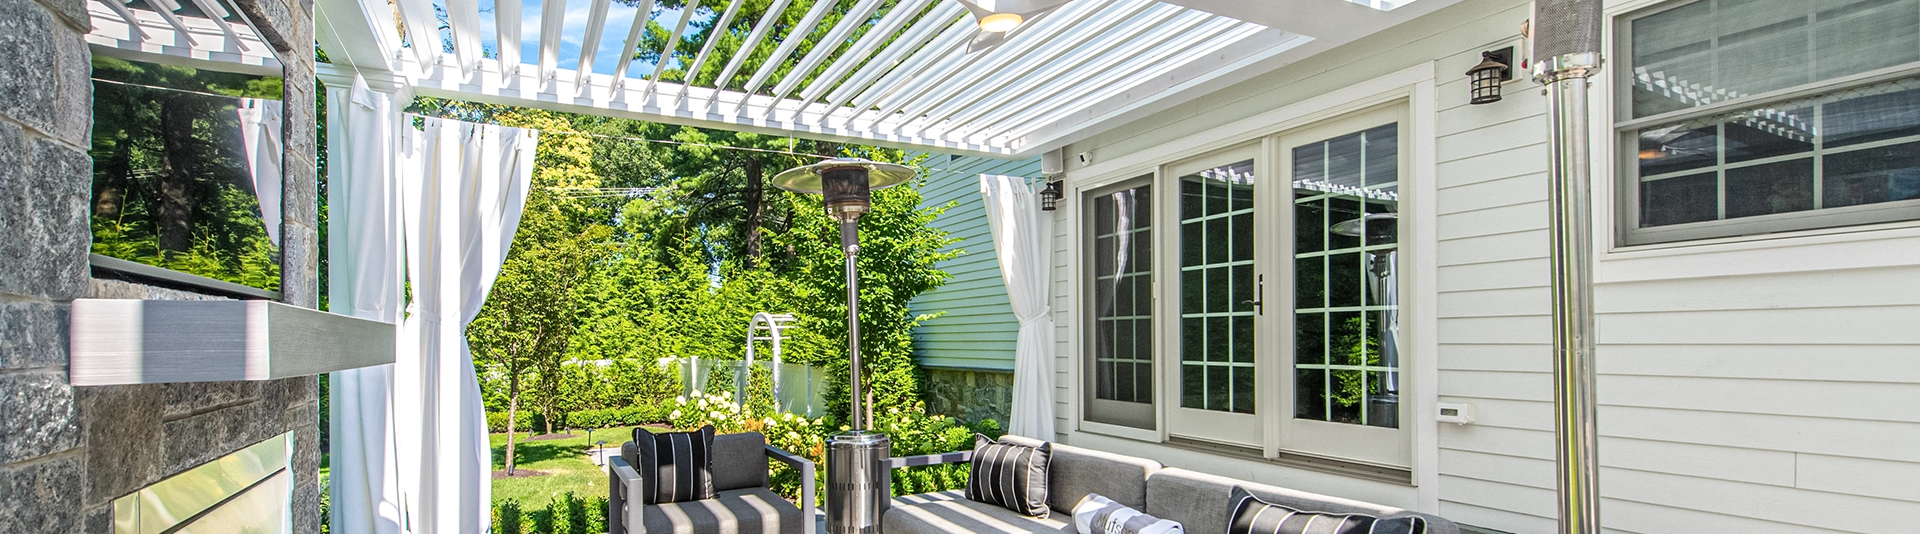 Modern white louvered pergola attached to house with French doors, stone fireplace, and outdoor seating area.